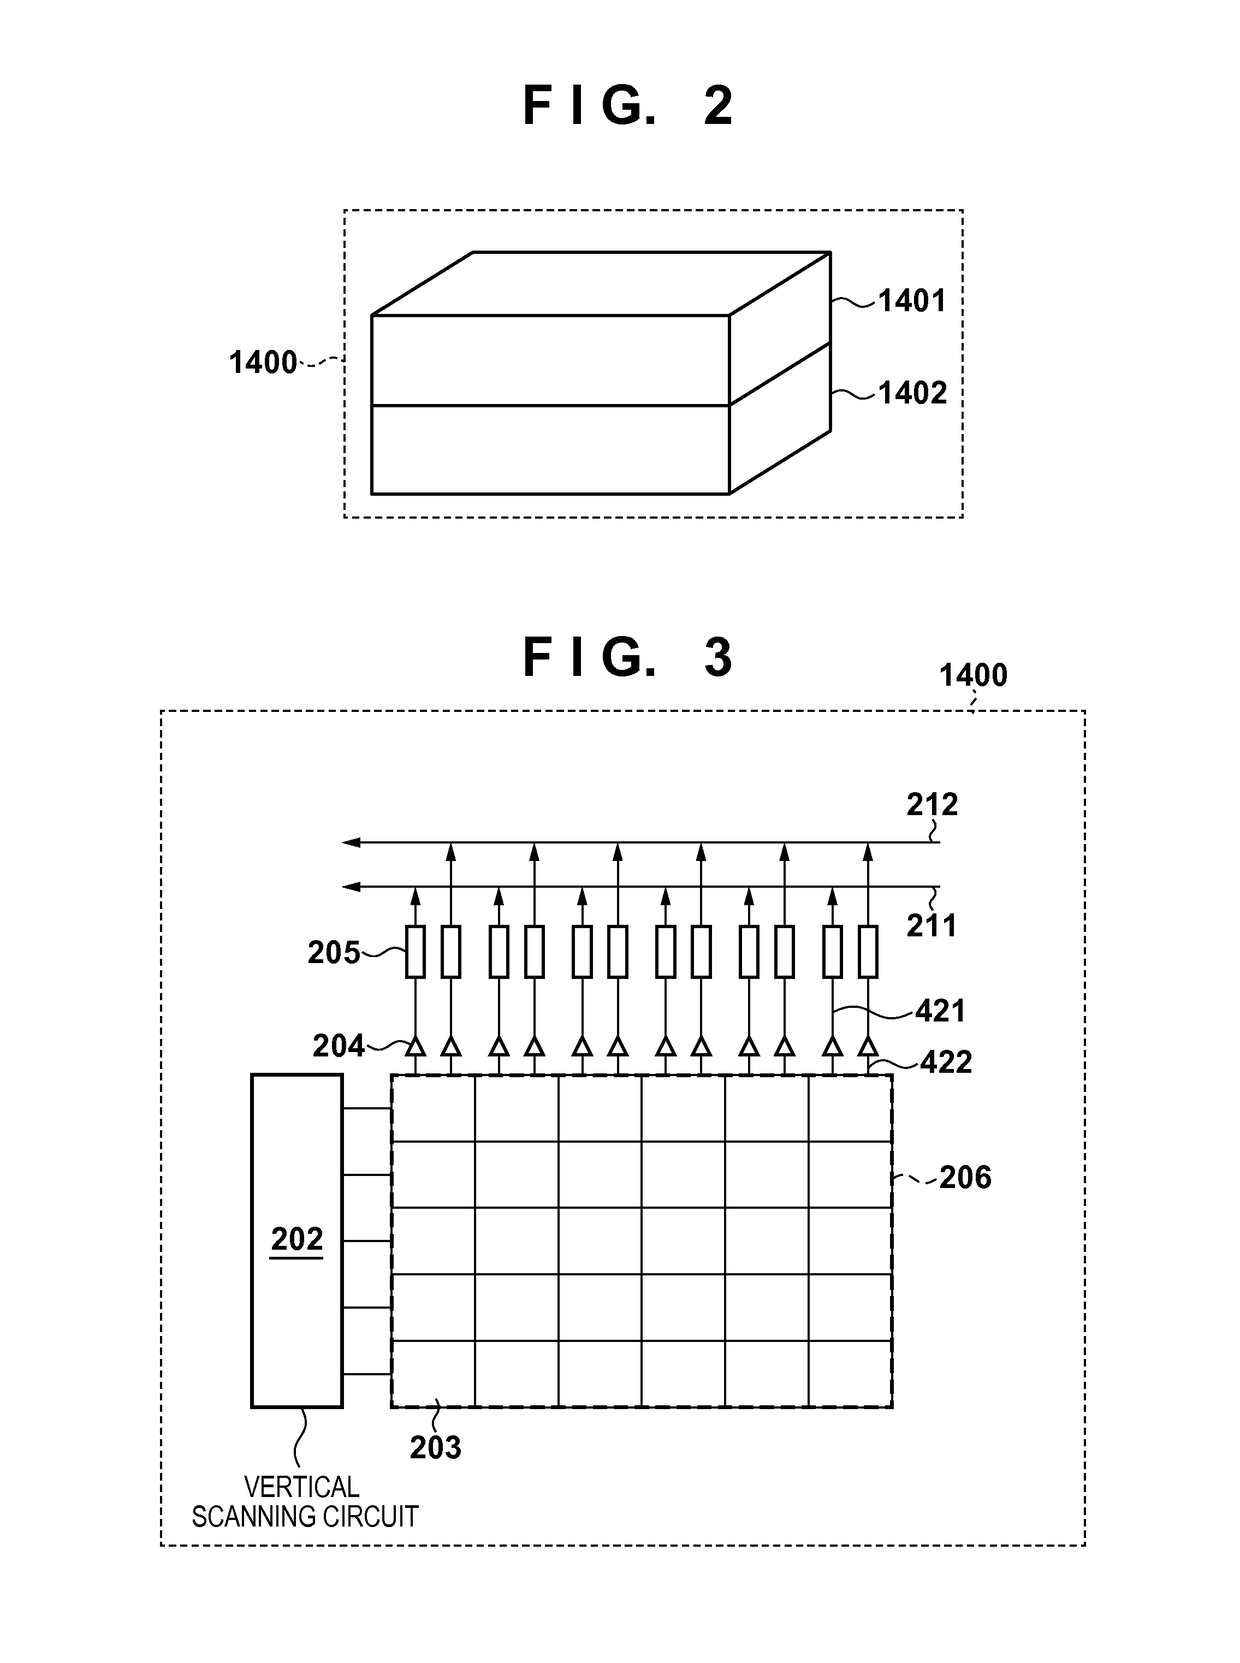 Image capturing apparatus and method for controlling the image capturing apparatus